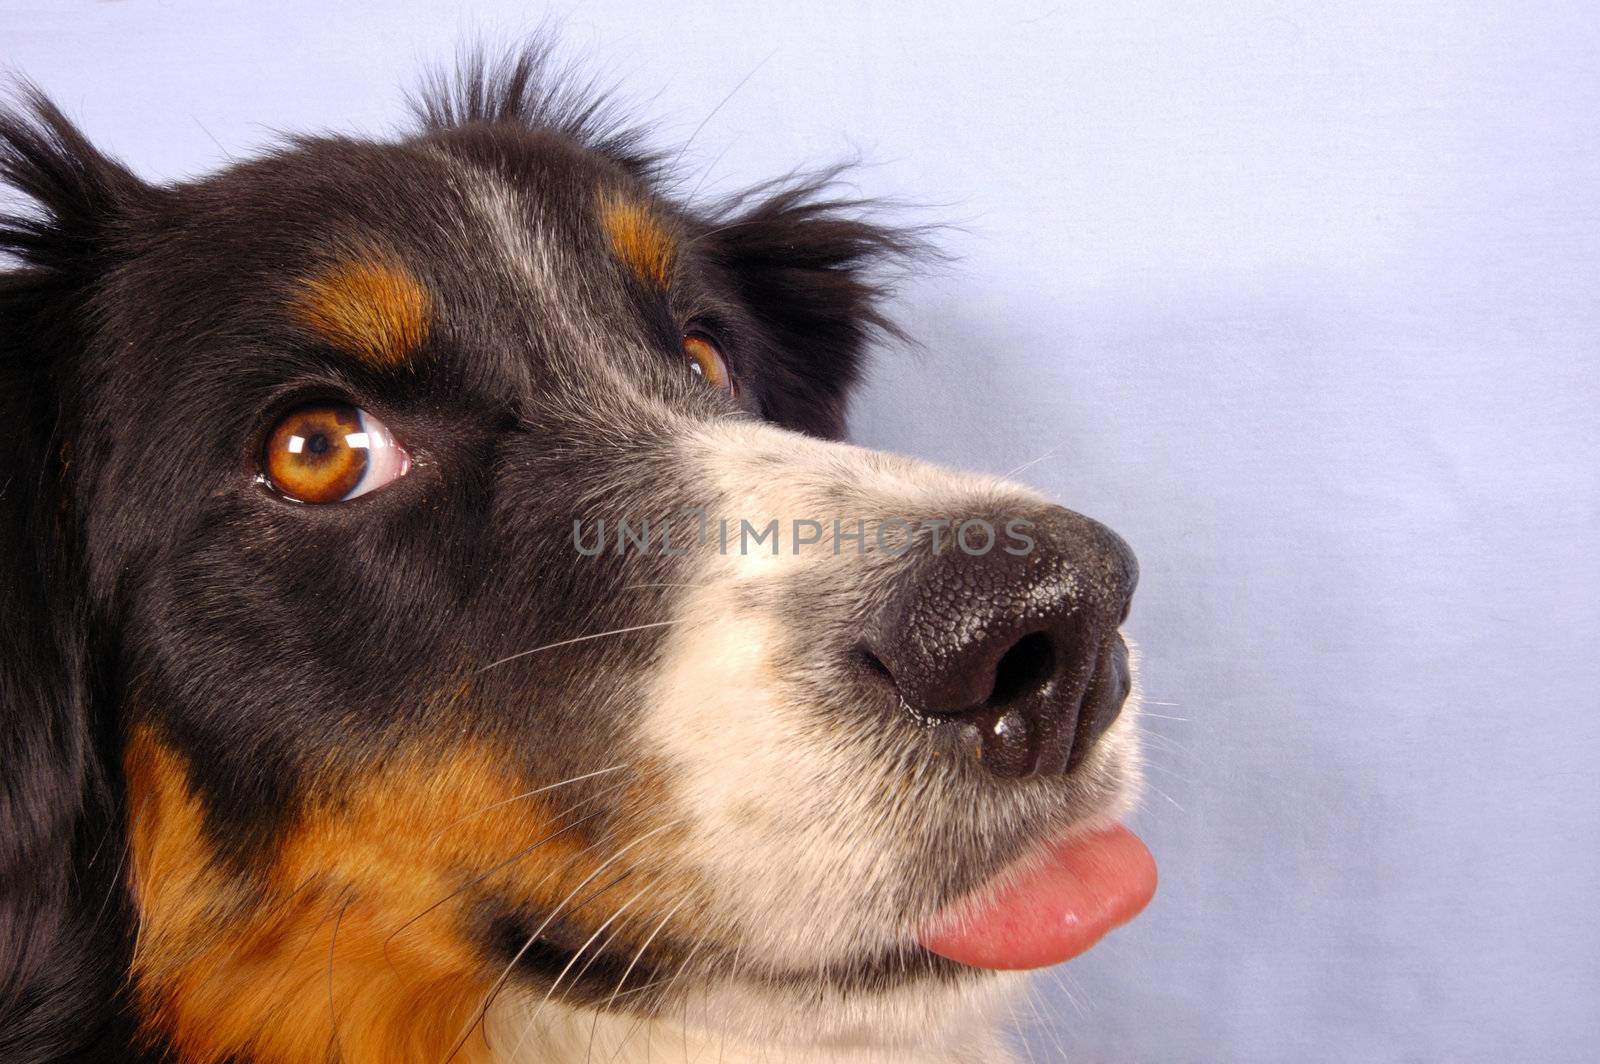 Portrait of a young dog sticking its tongue out